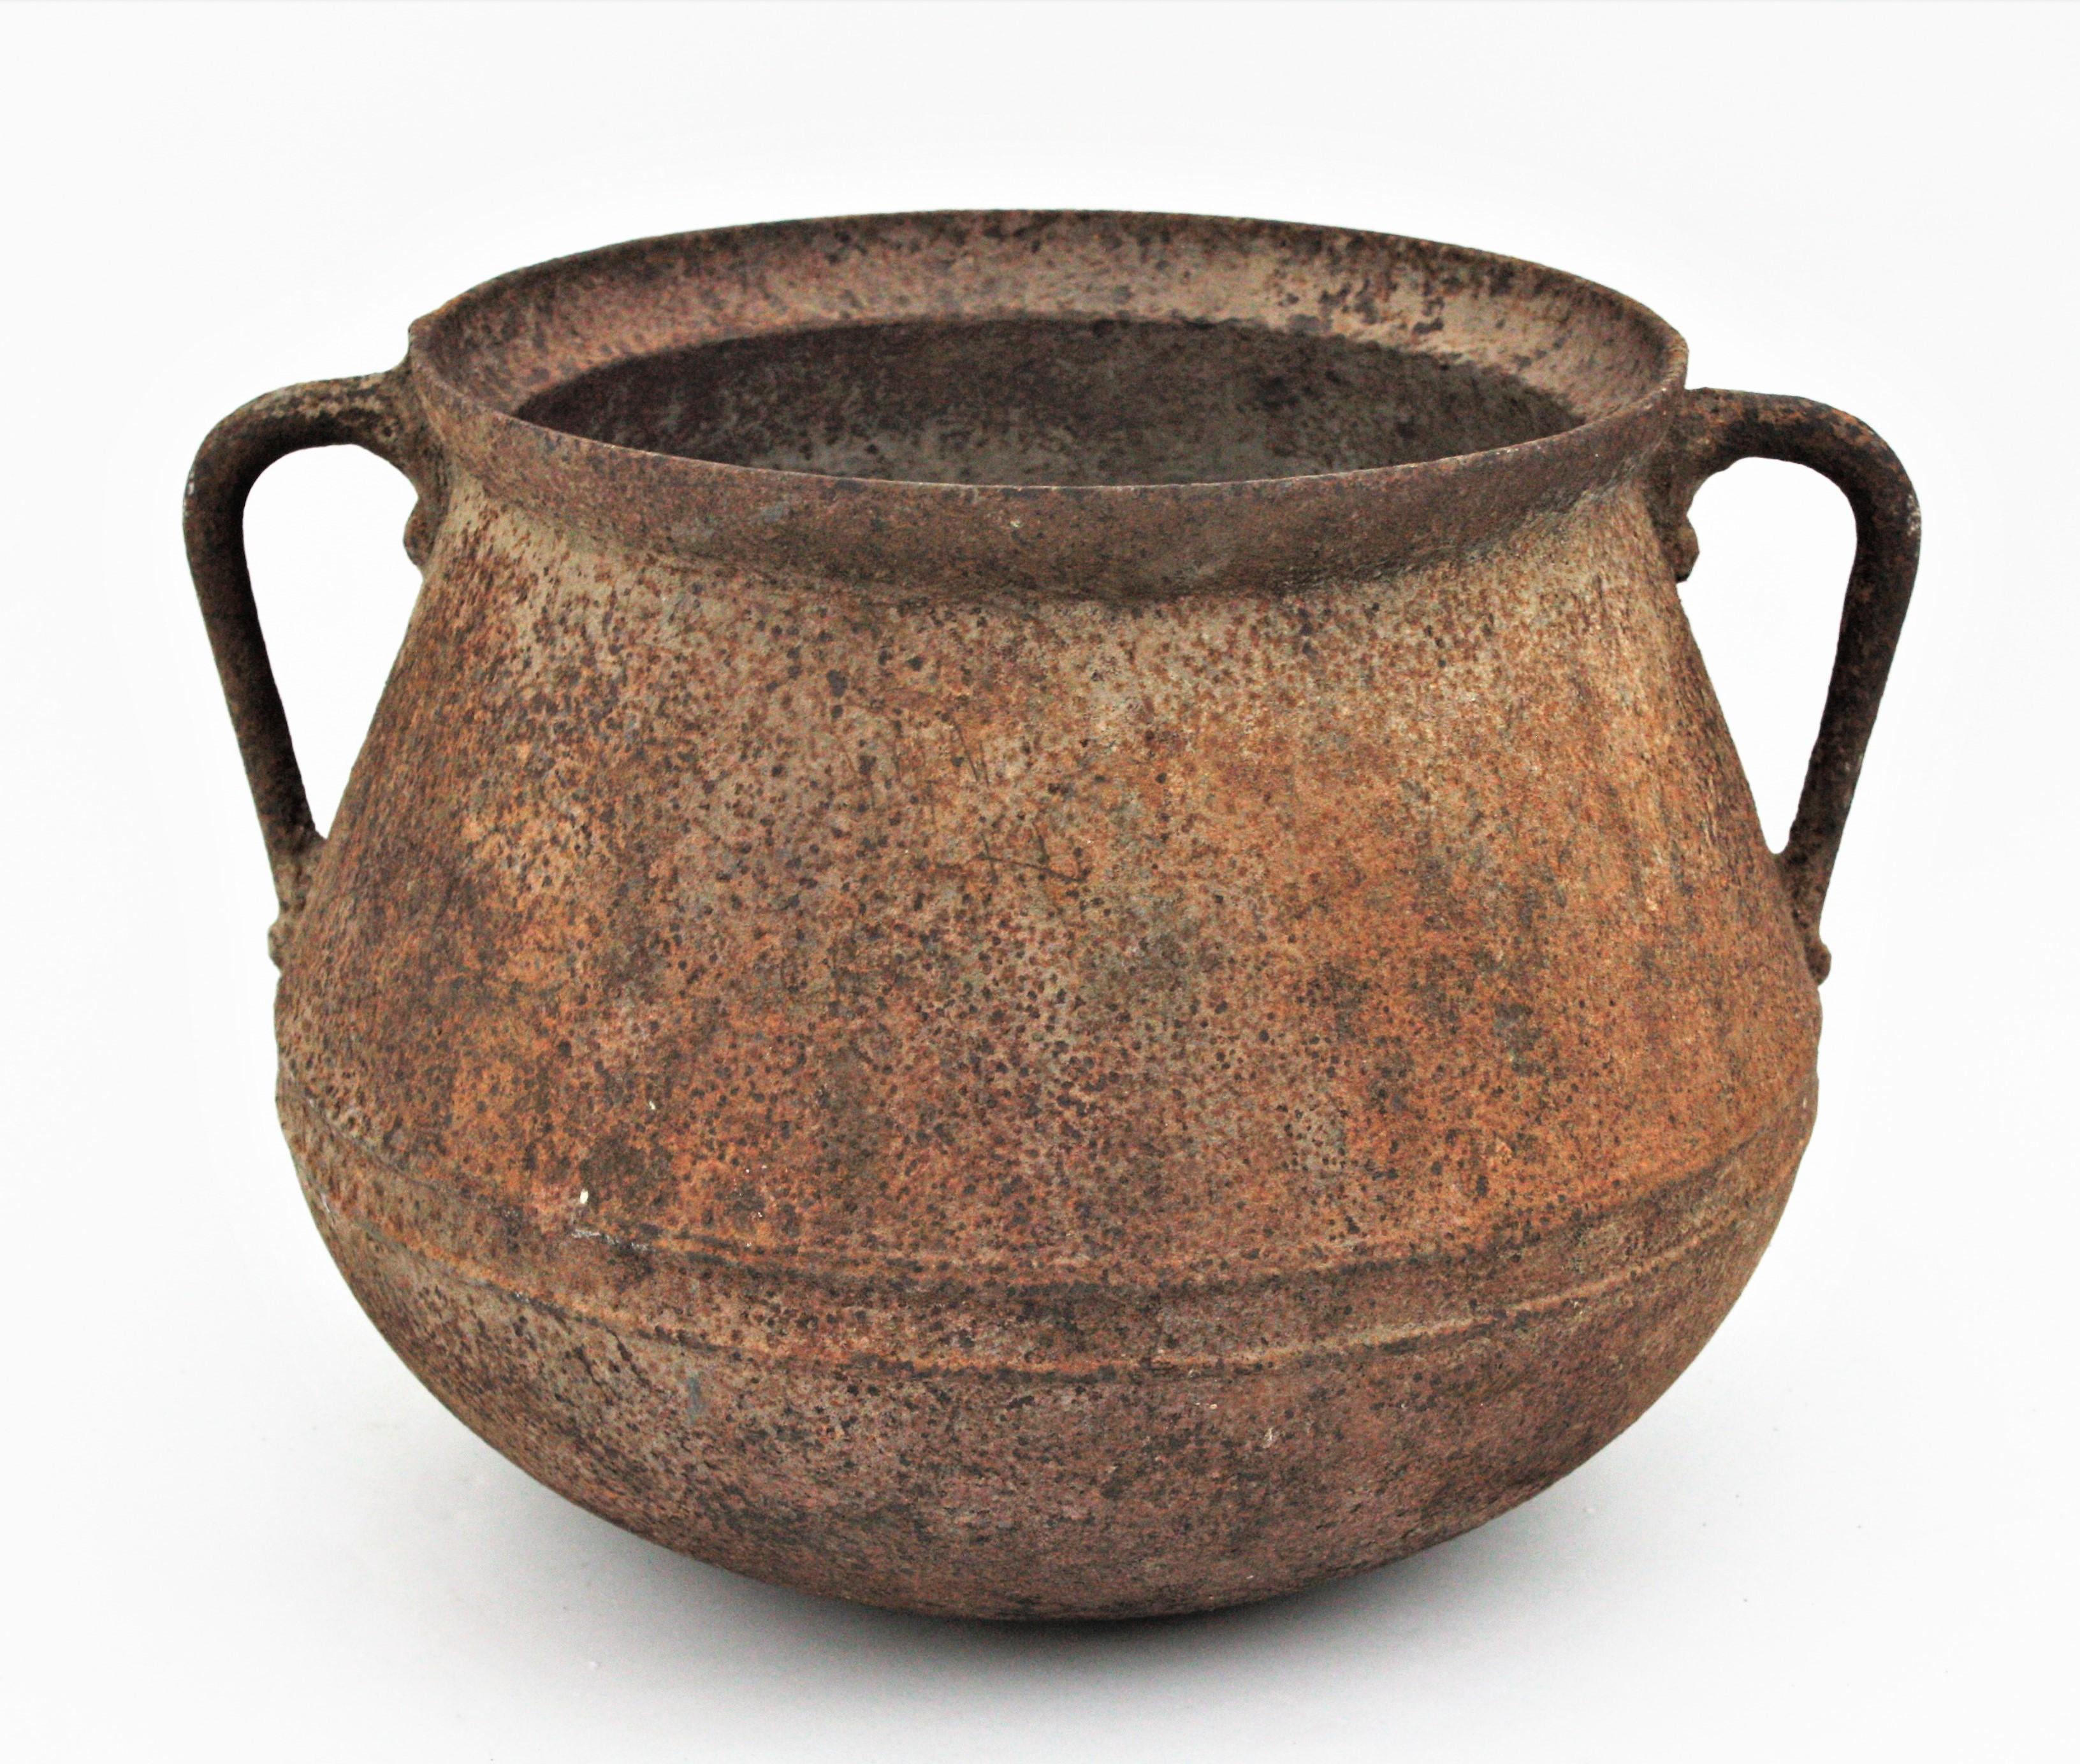 Spanish Rustic Iron Cauldron Pot or Vessel with Rusty Original Patina For Sale 4